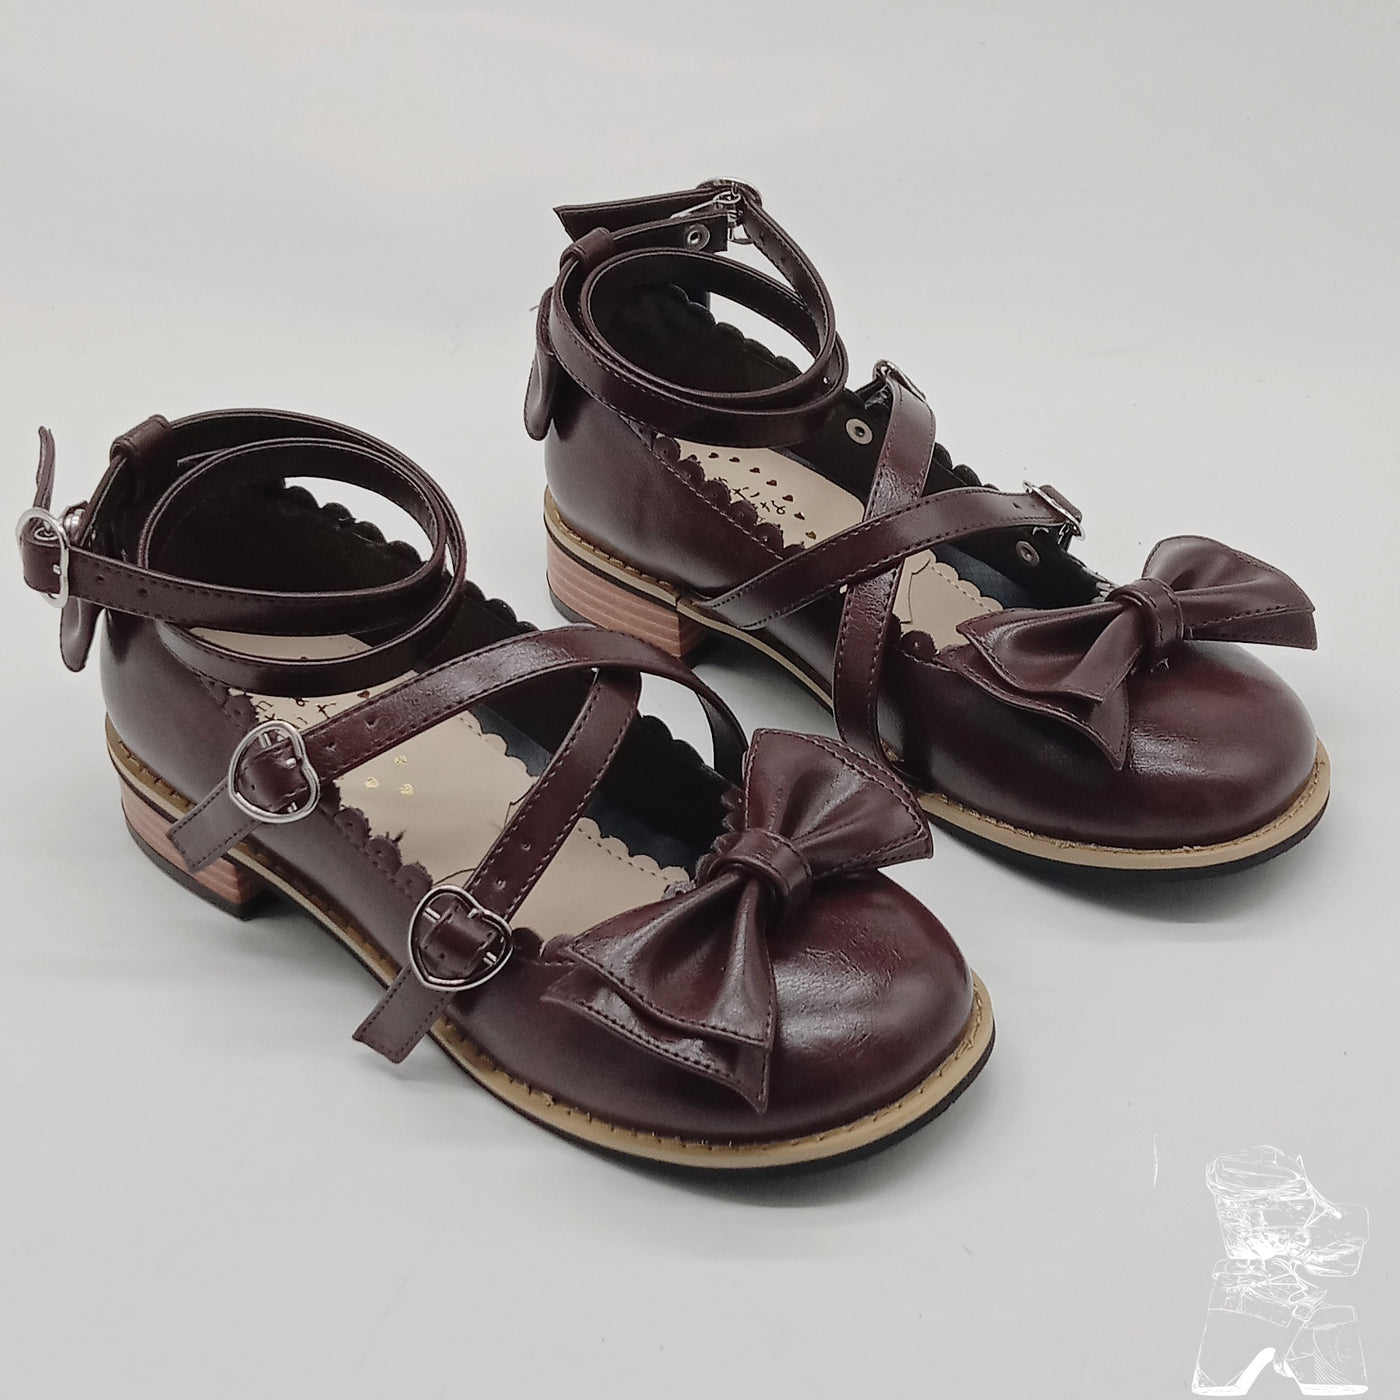 Antaina~ Japanese Style Lolita Tea Party Shoes Size 46-49 matte coffee-low heel 2.5cm 46 